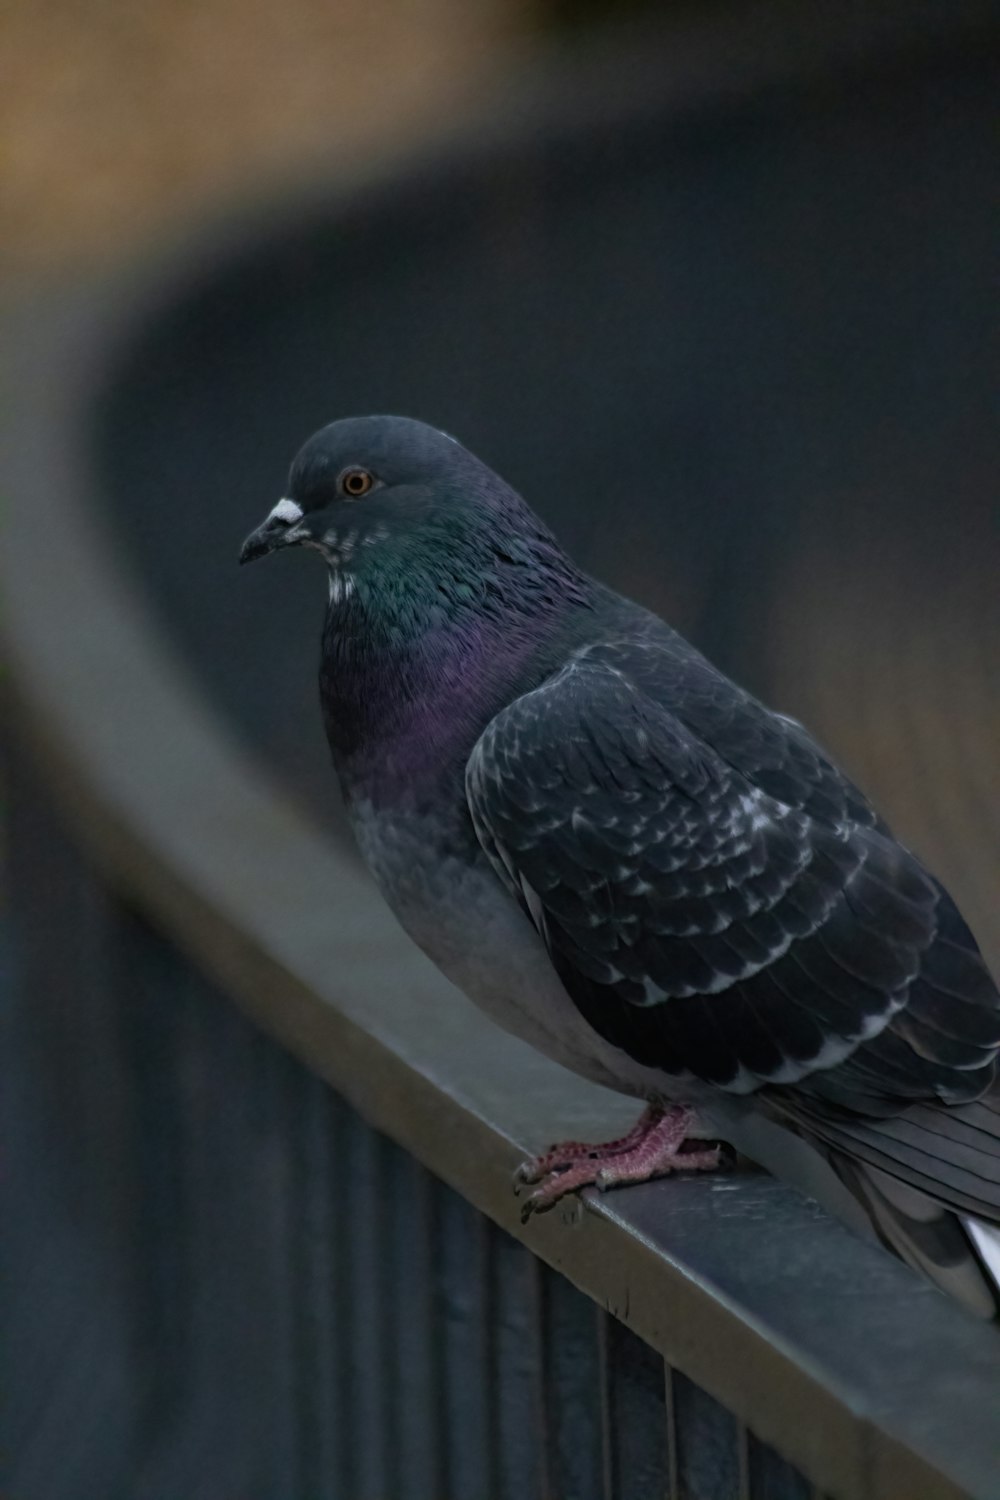 a pigeon is sitting on a metal rail